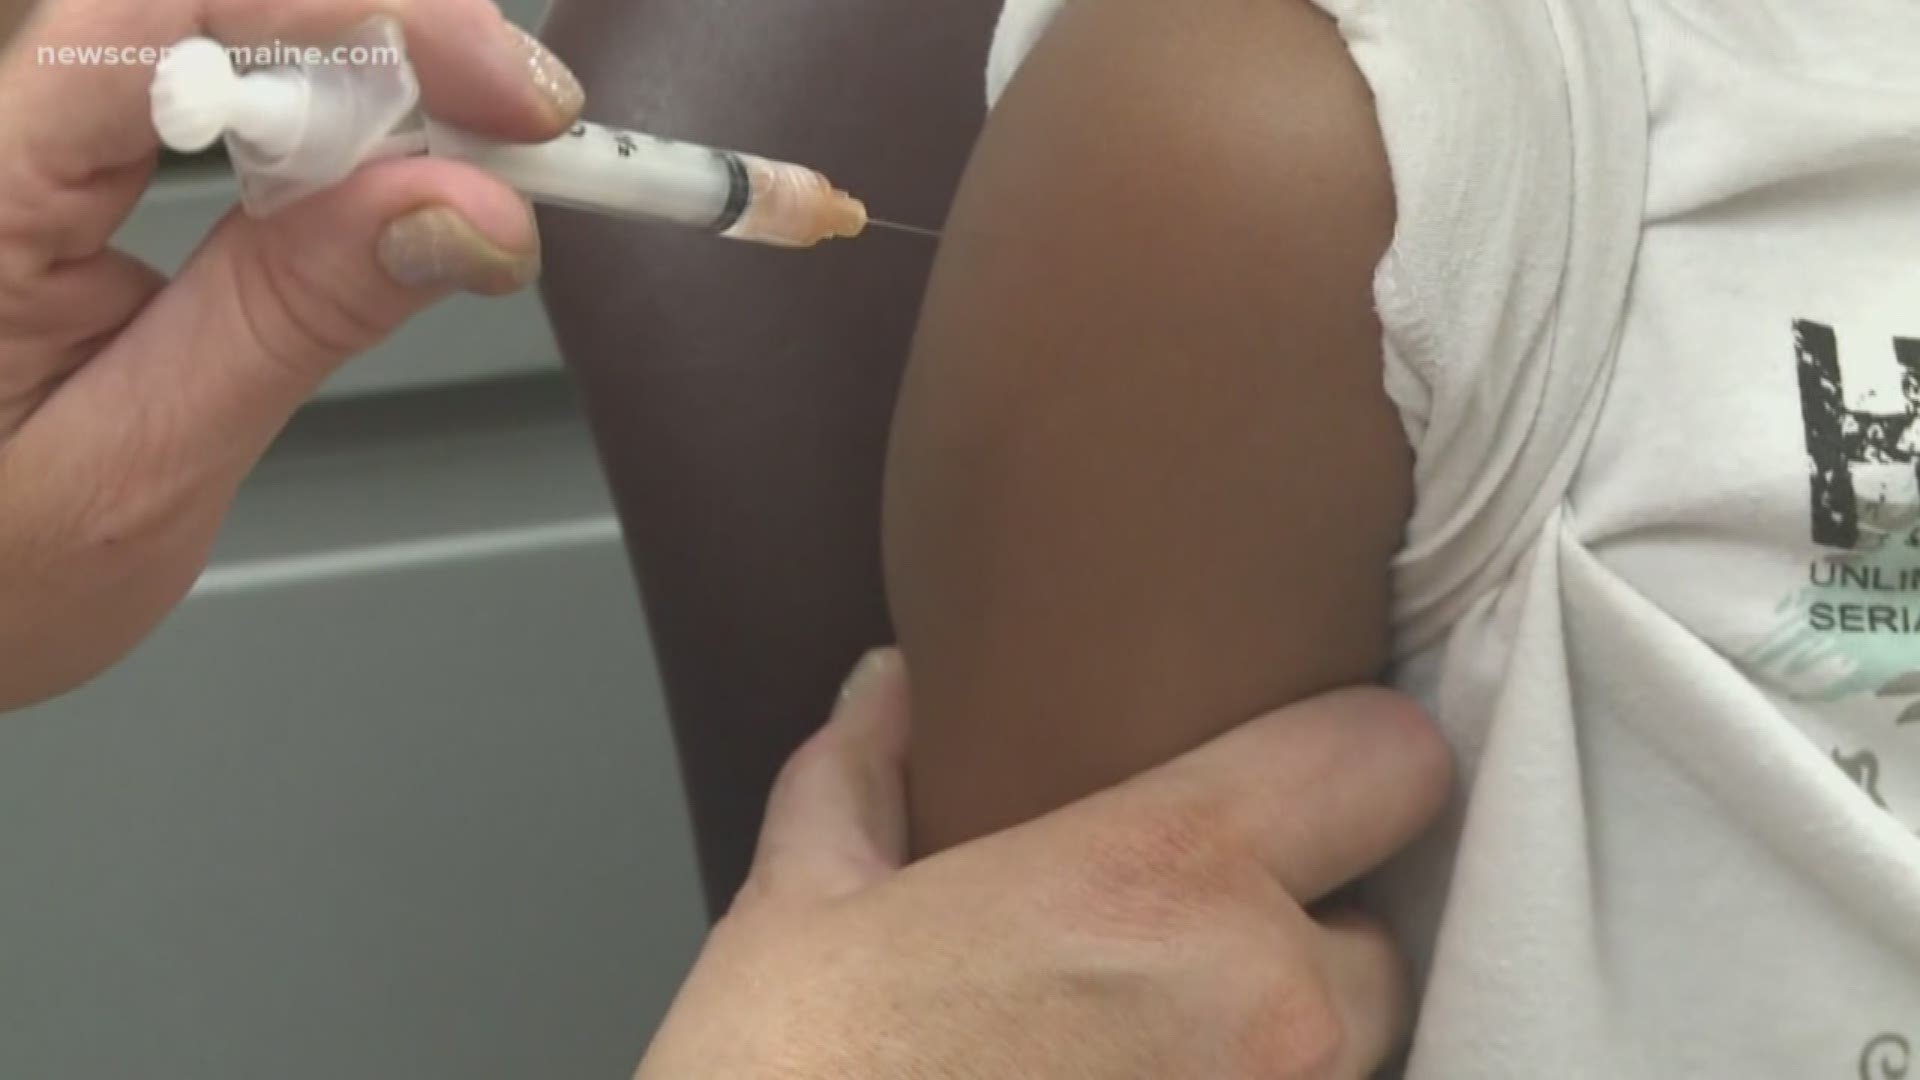 The Education Committee voted on Wednesday to pass a bill that would reduce the number of vaccine exemptions allowed for children in school.